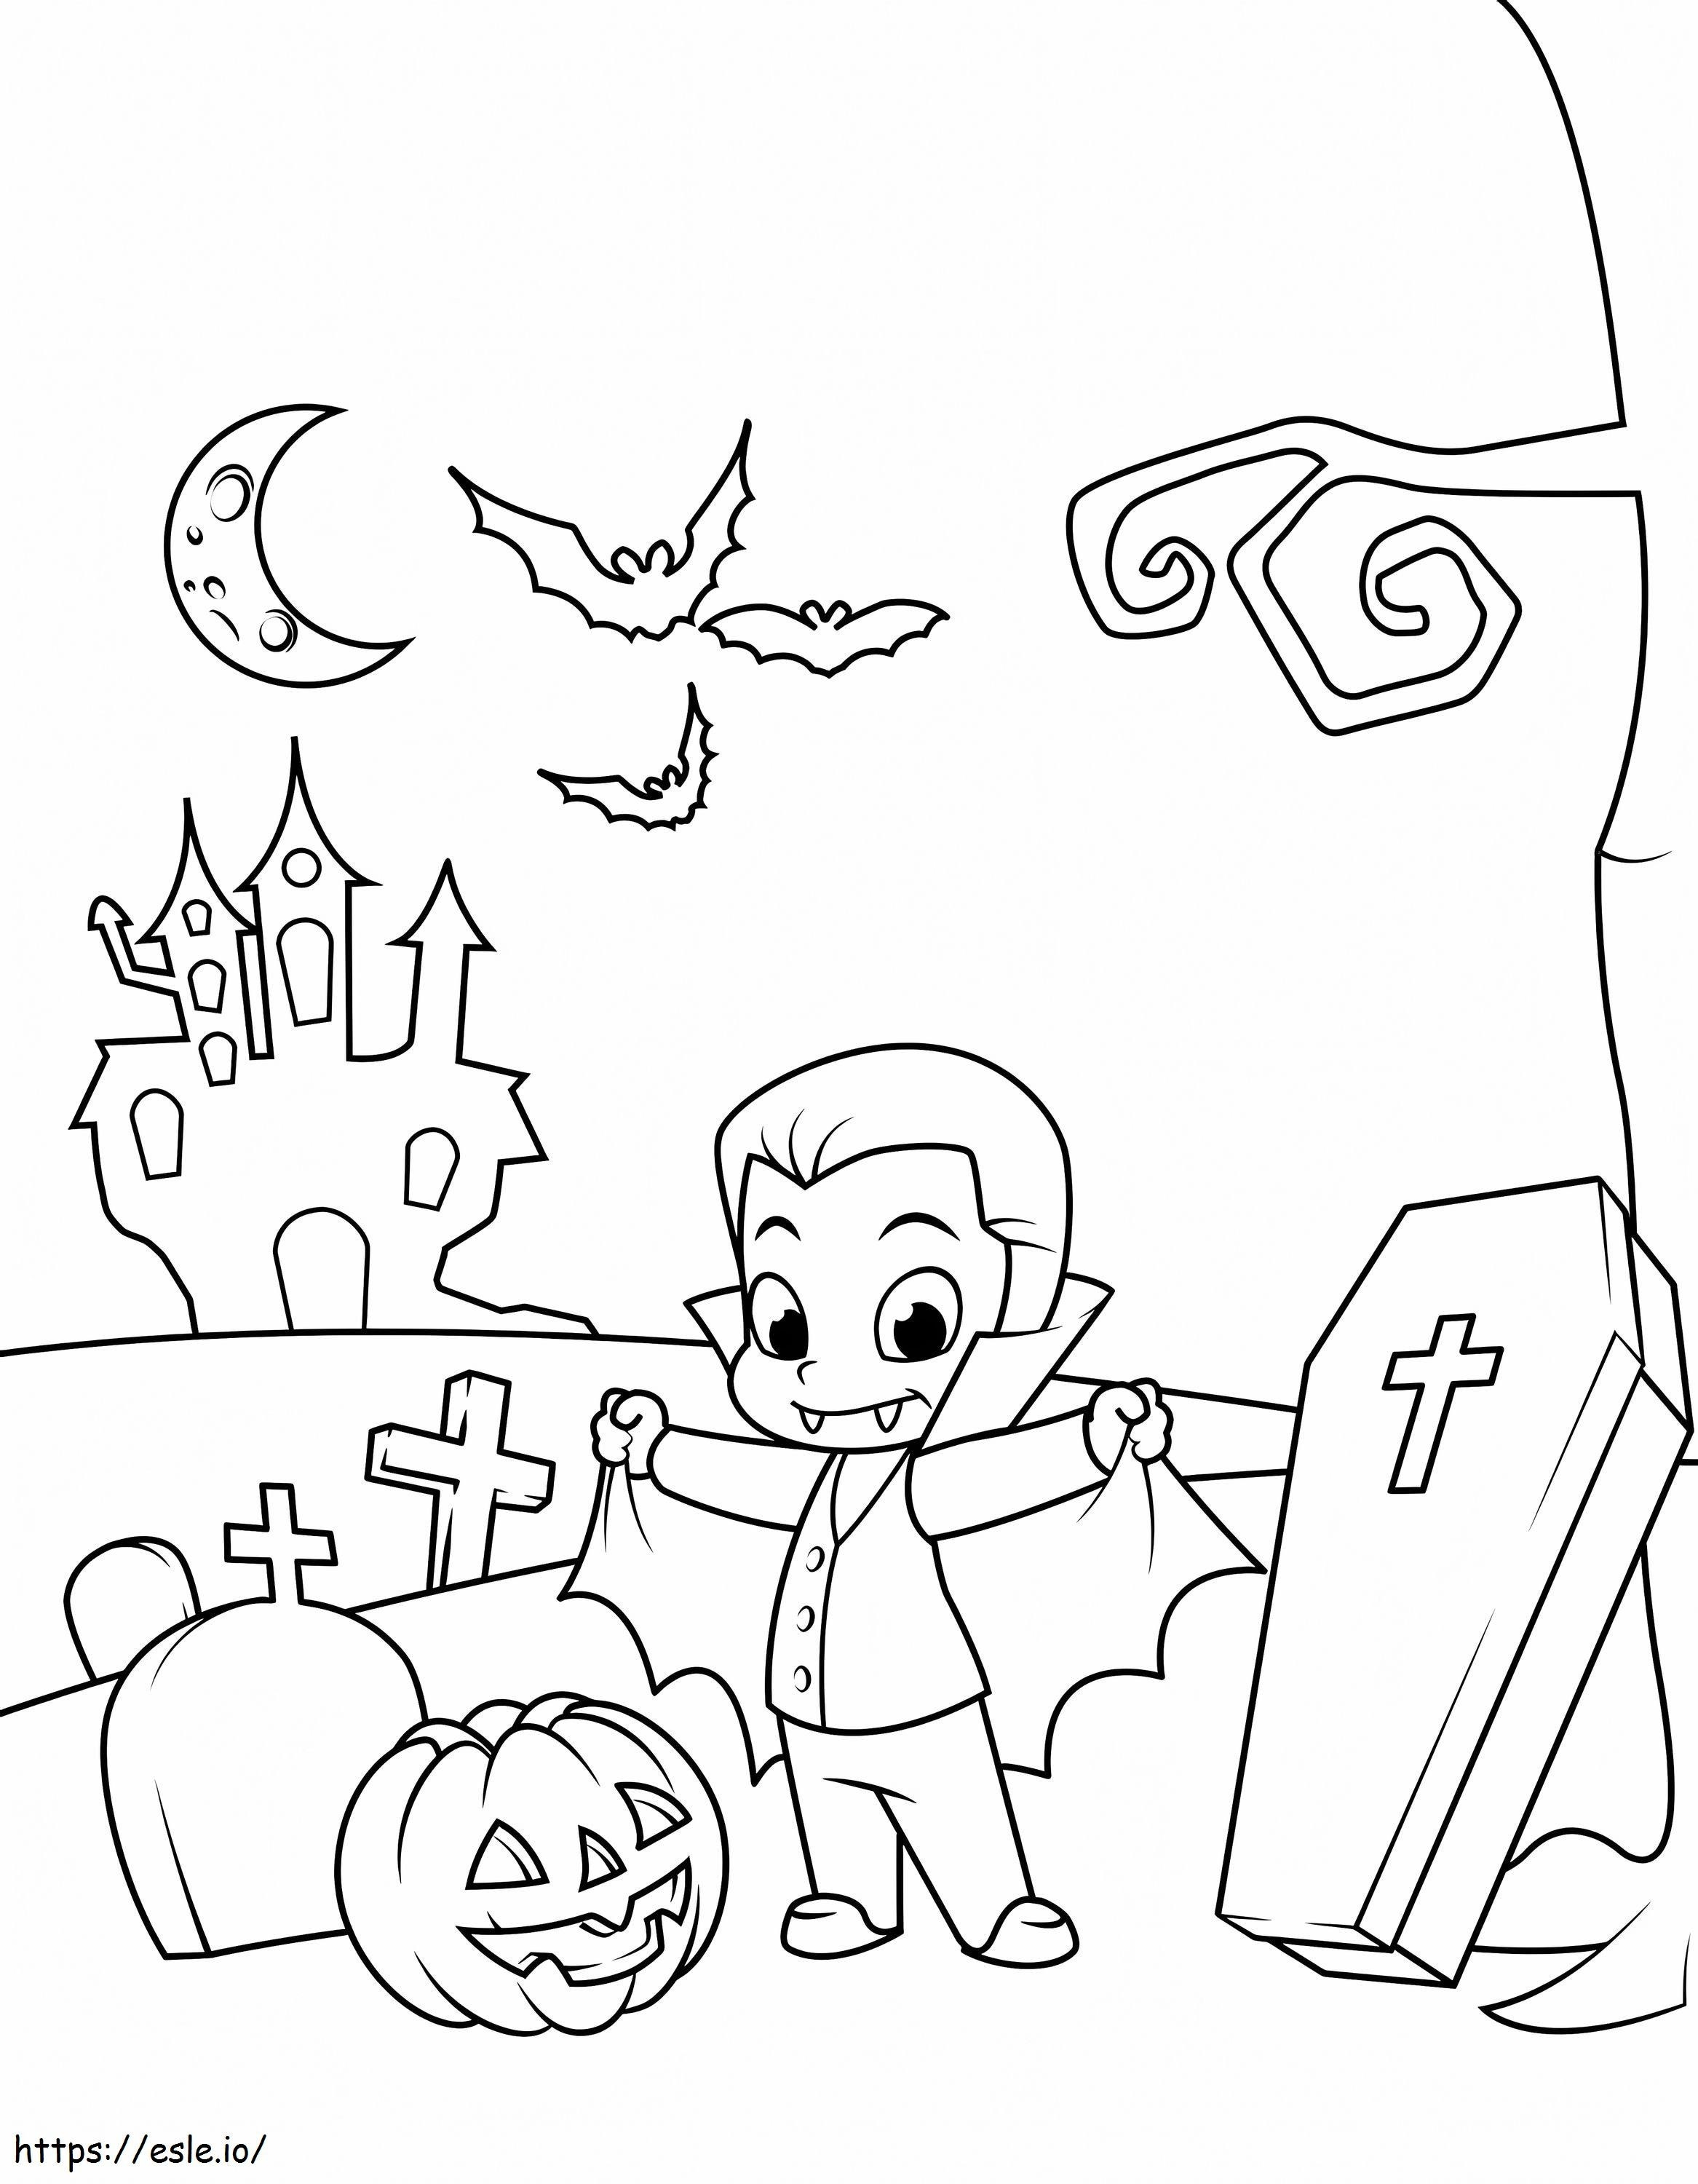 Cemetery 10 coloring page